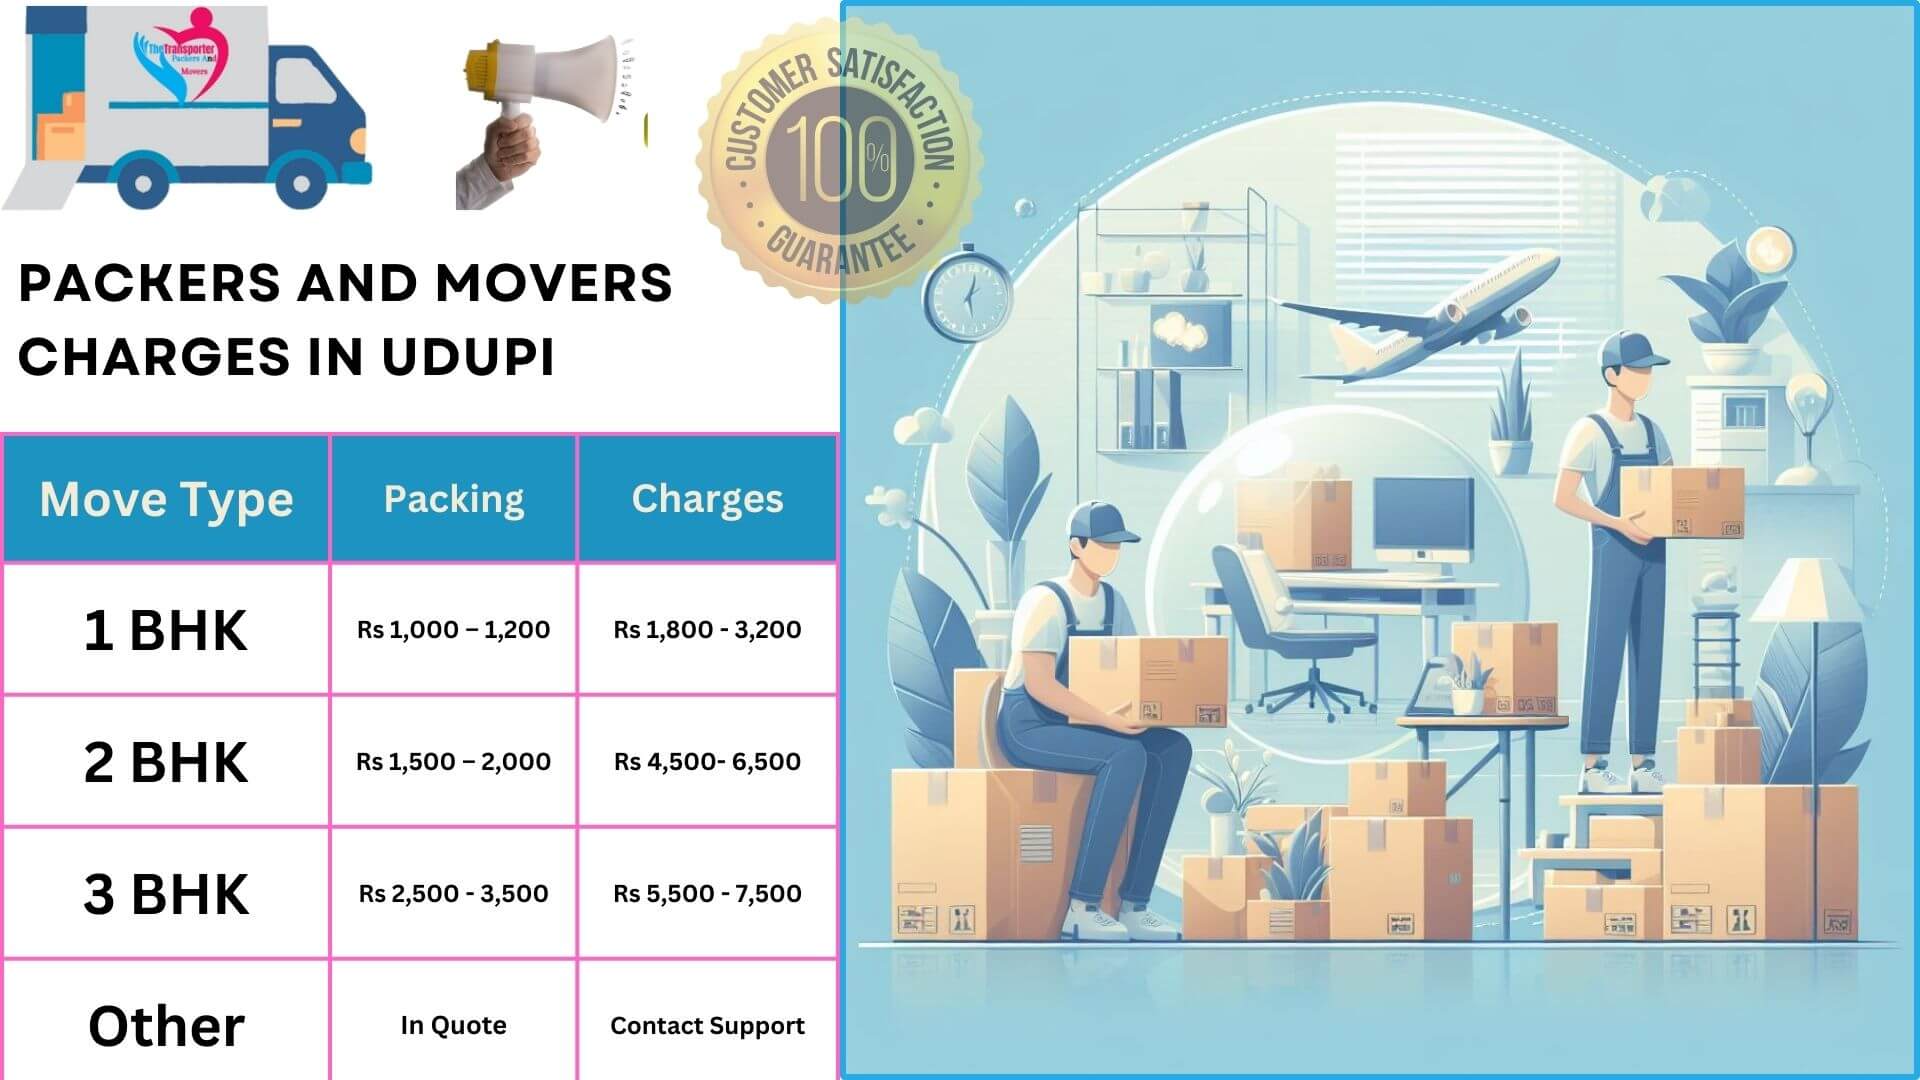 TheTransporter Packers and movers Charges list in Udupi 